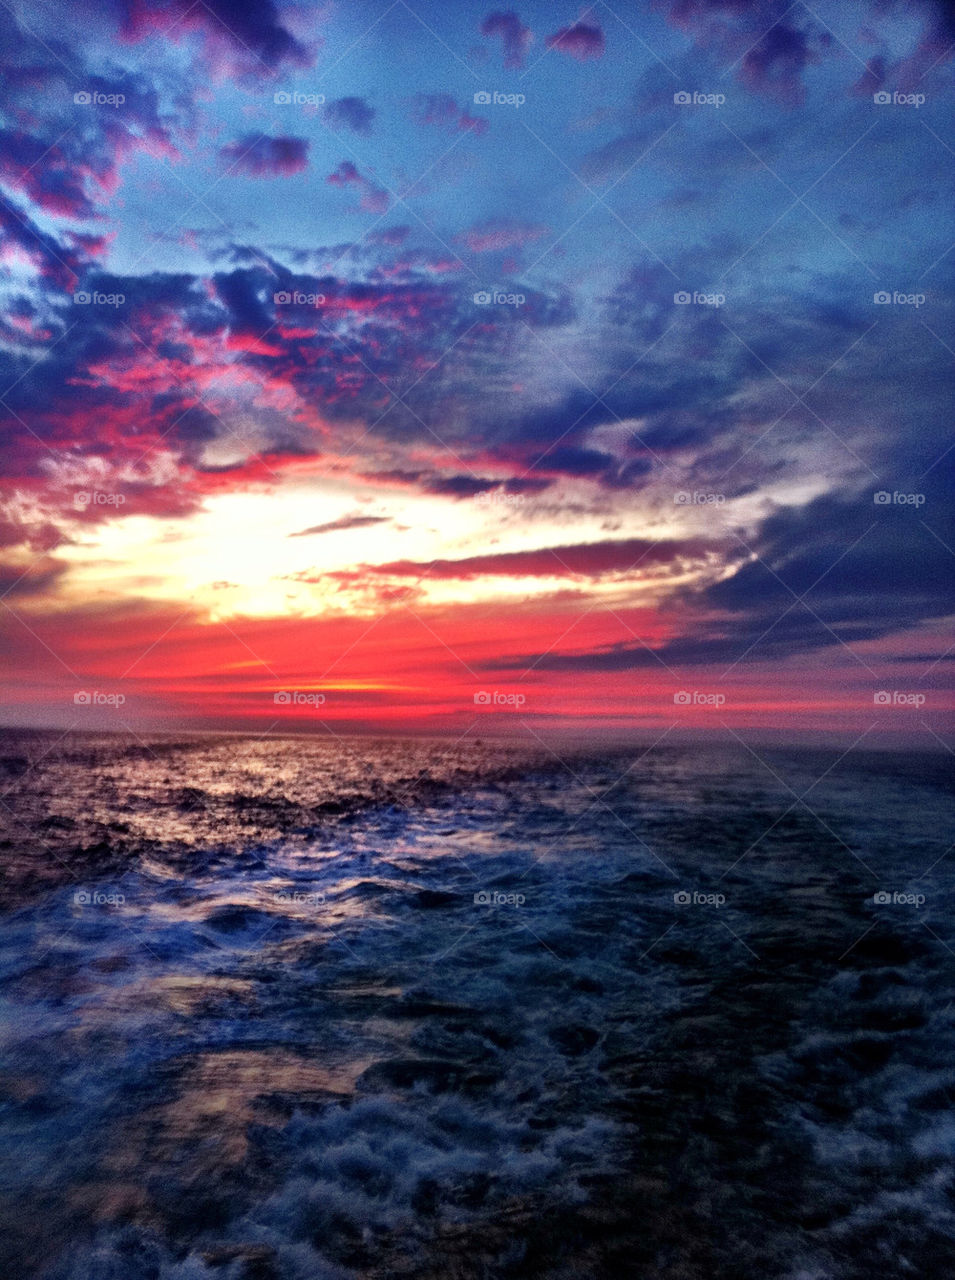 ocean sunset boat waves by spindola